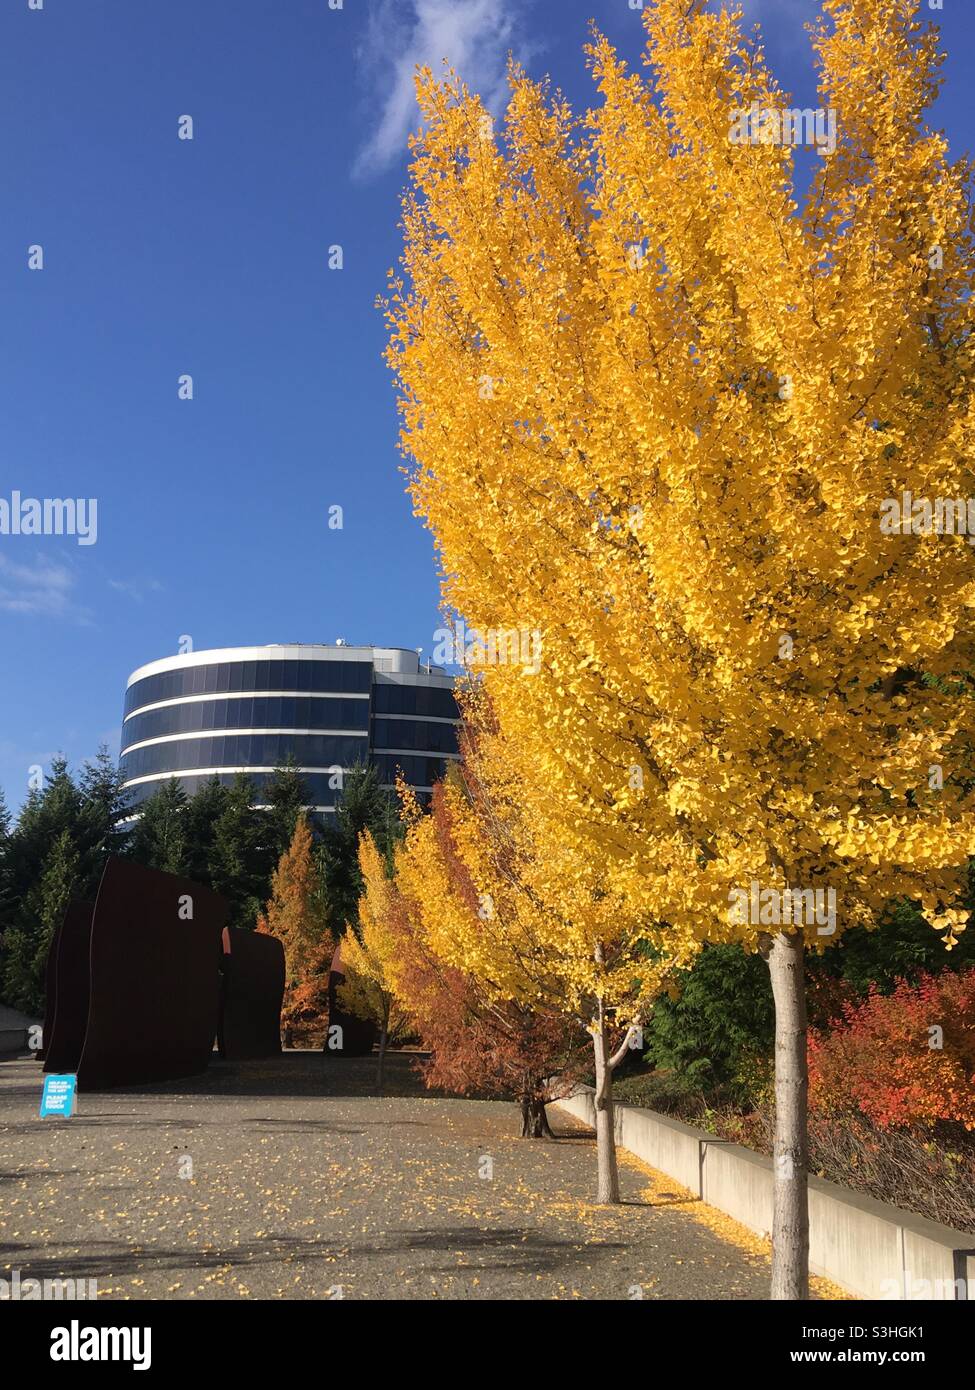 Autumn Fall Trees Leaves at Olympic Sculpture Park Seattle Washington Stock Photo